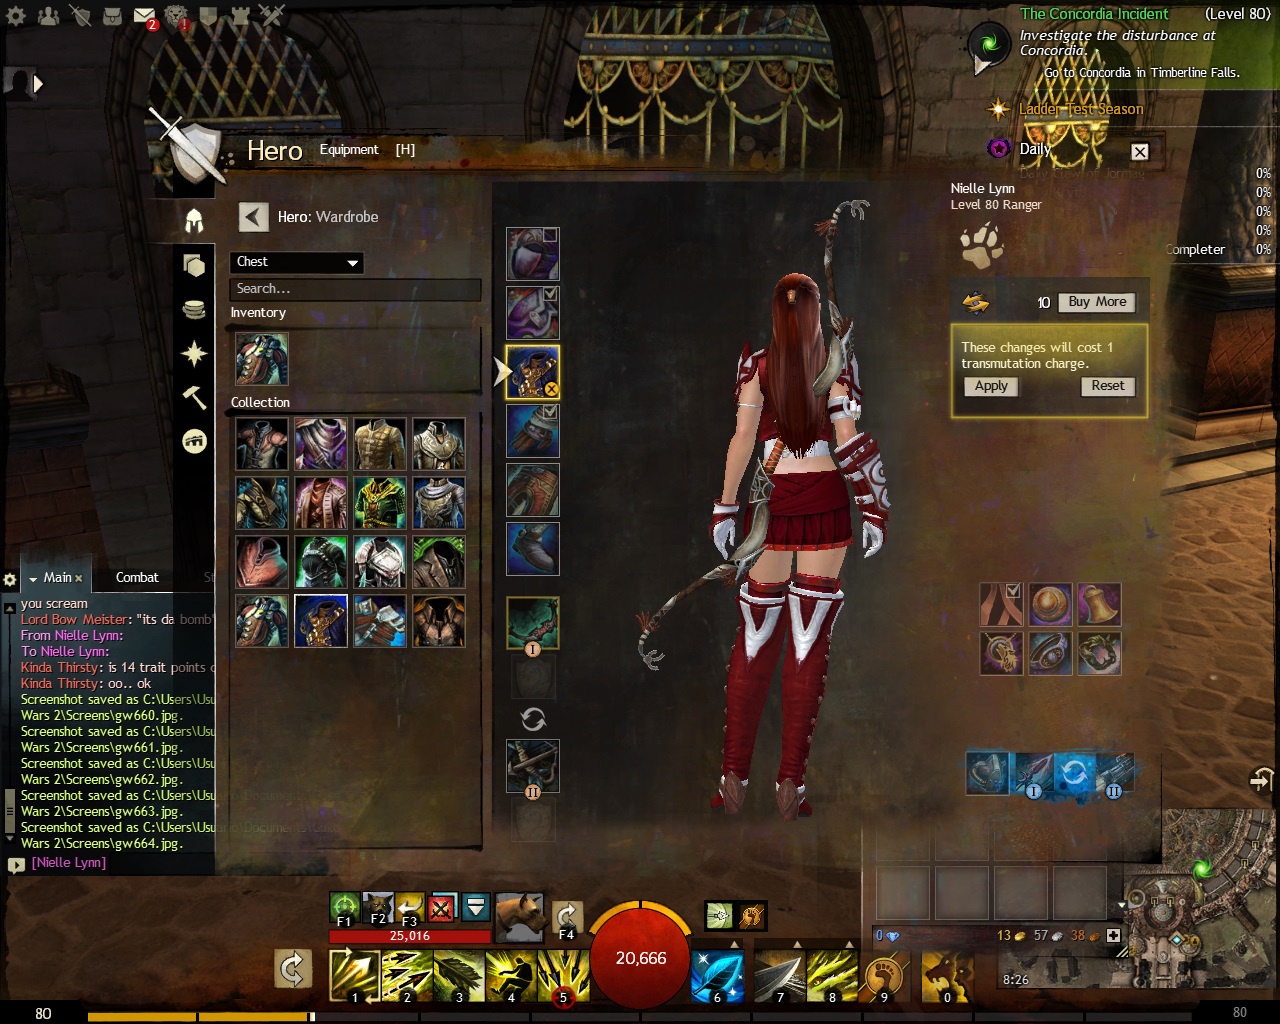 Guild Wars 2 - Snakethief Coat with Magitech Skirt - 02